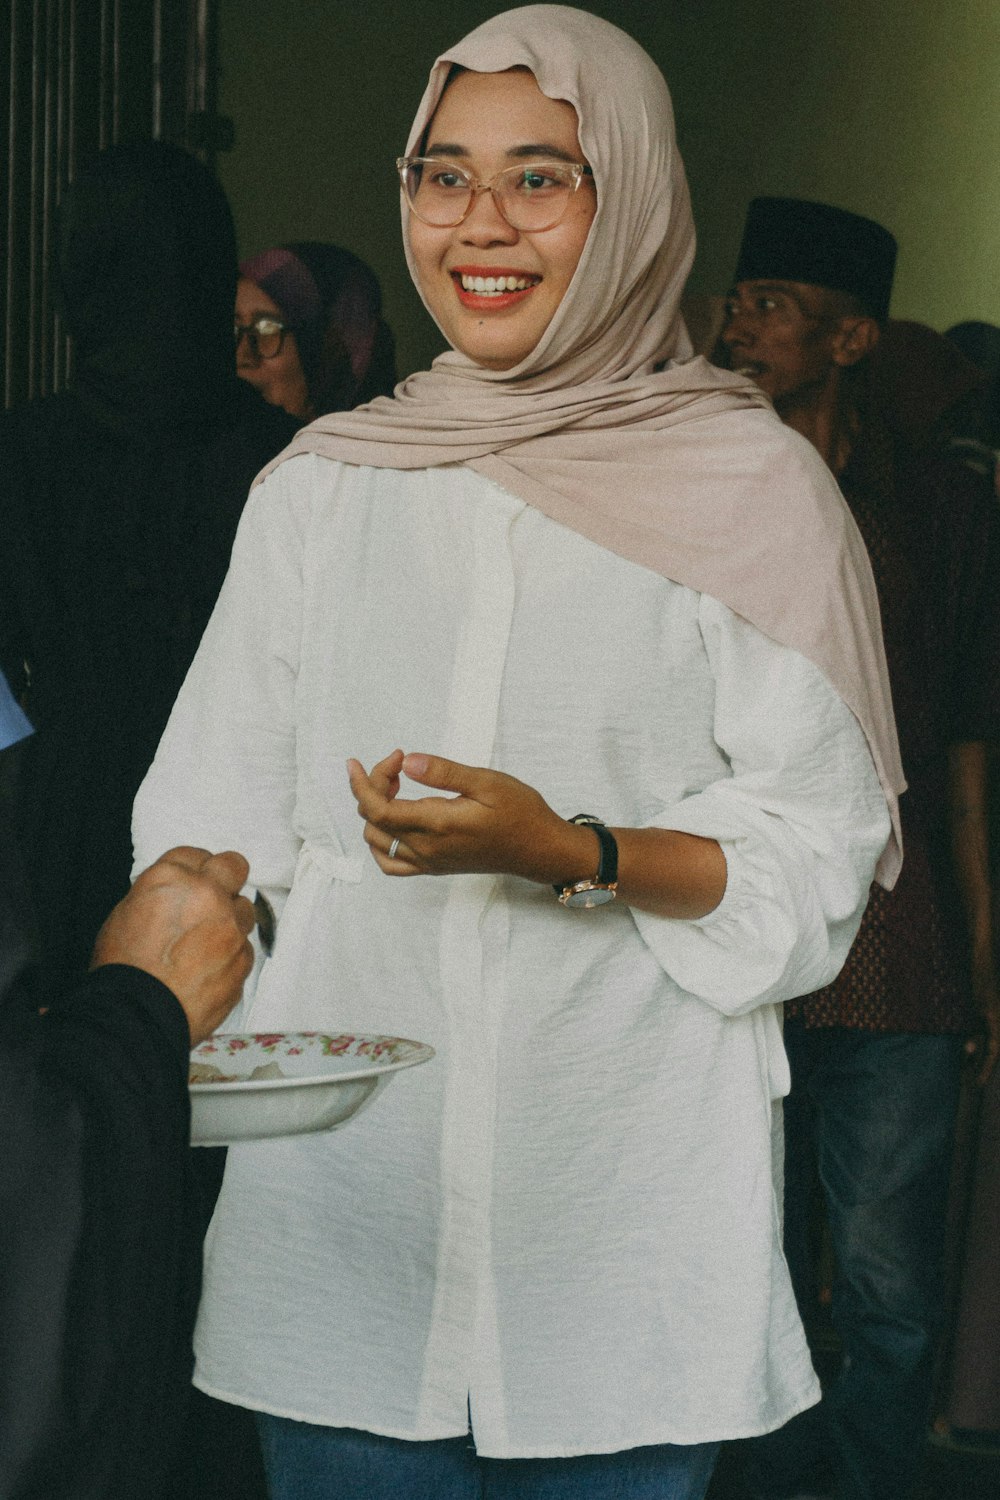 a woman in a hijab smiles as she holds a plate of food